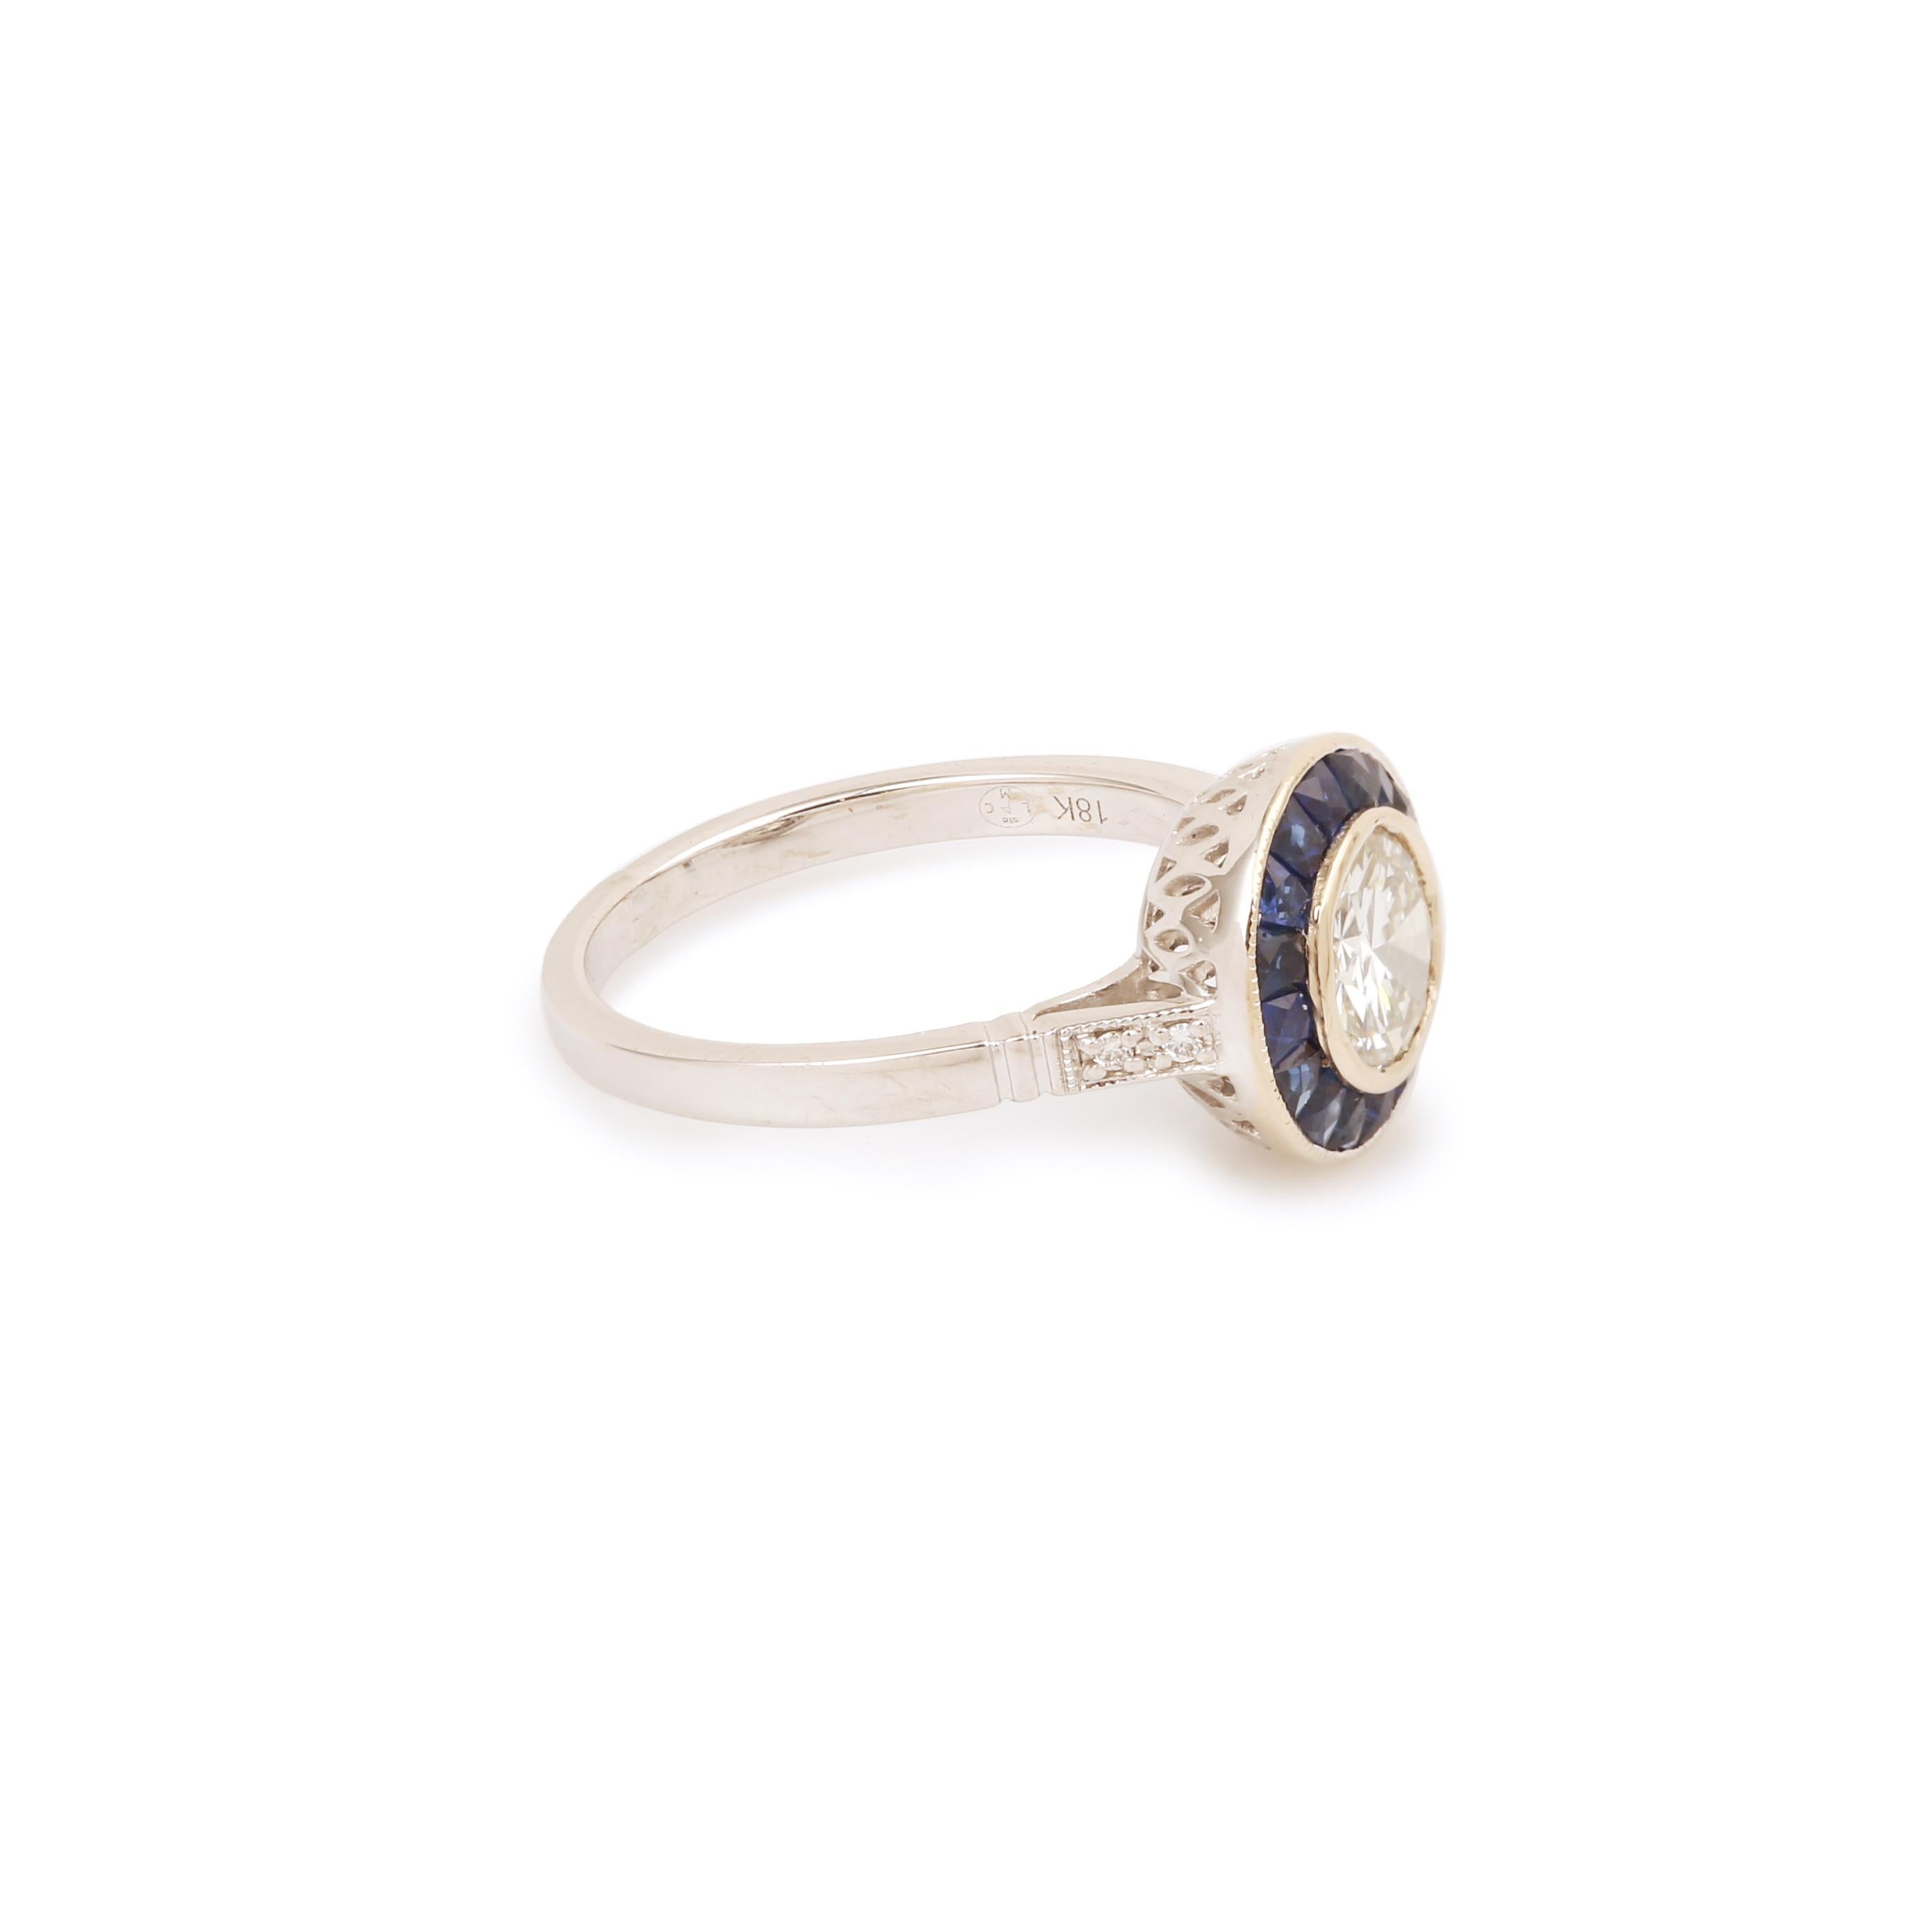 Art Deco style ring in white gold set with a diamond in a sapphire surround, the shoulders paved with diamonds.

Central diamond weight: 0.94 carats

With a Carat Gem Lab certificate specifying color I, purity SI1, no fluorescence.

Total estimated